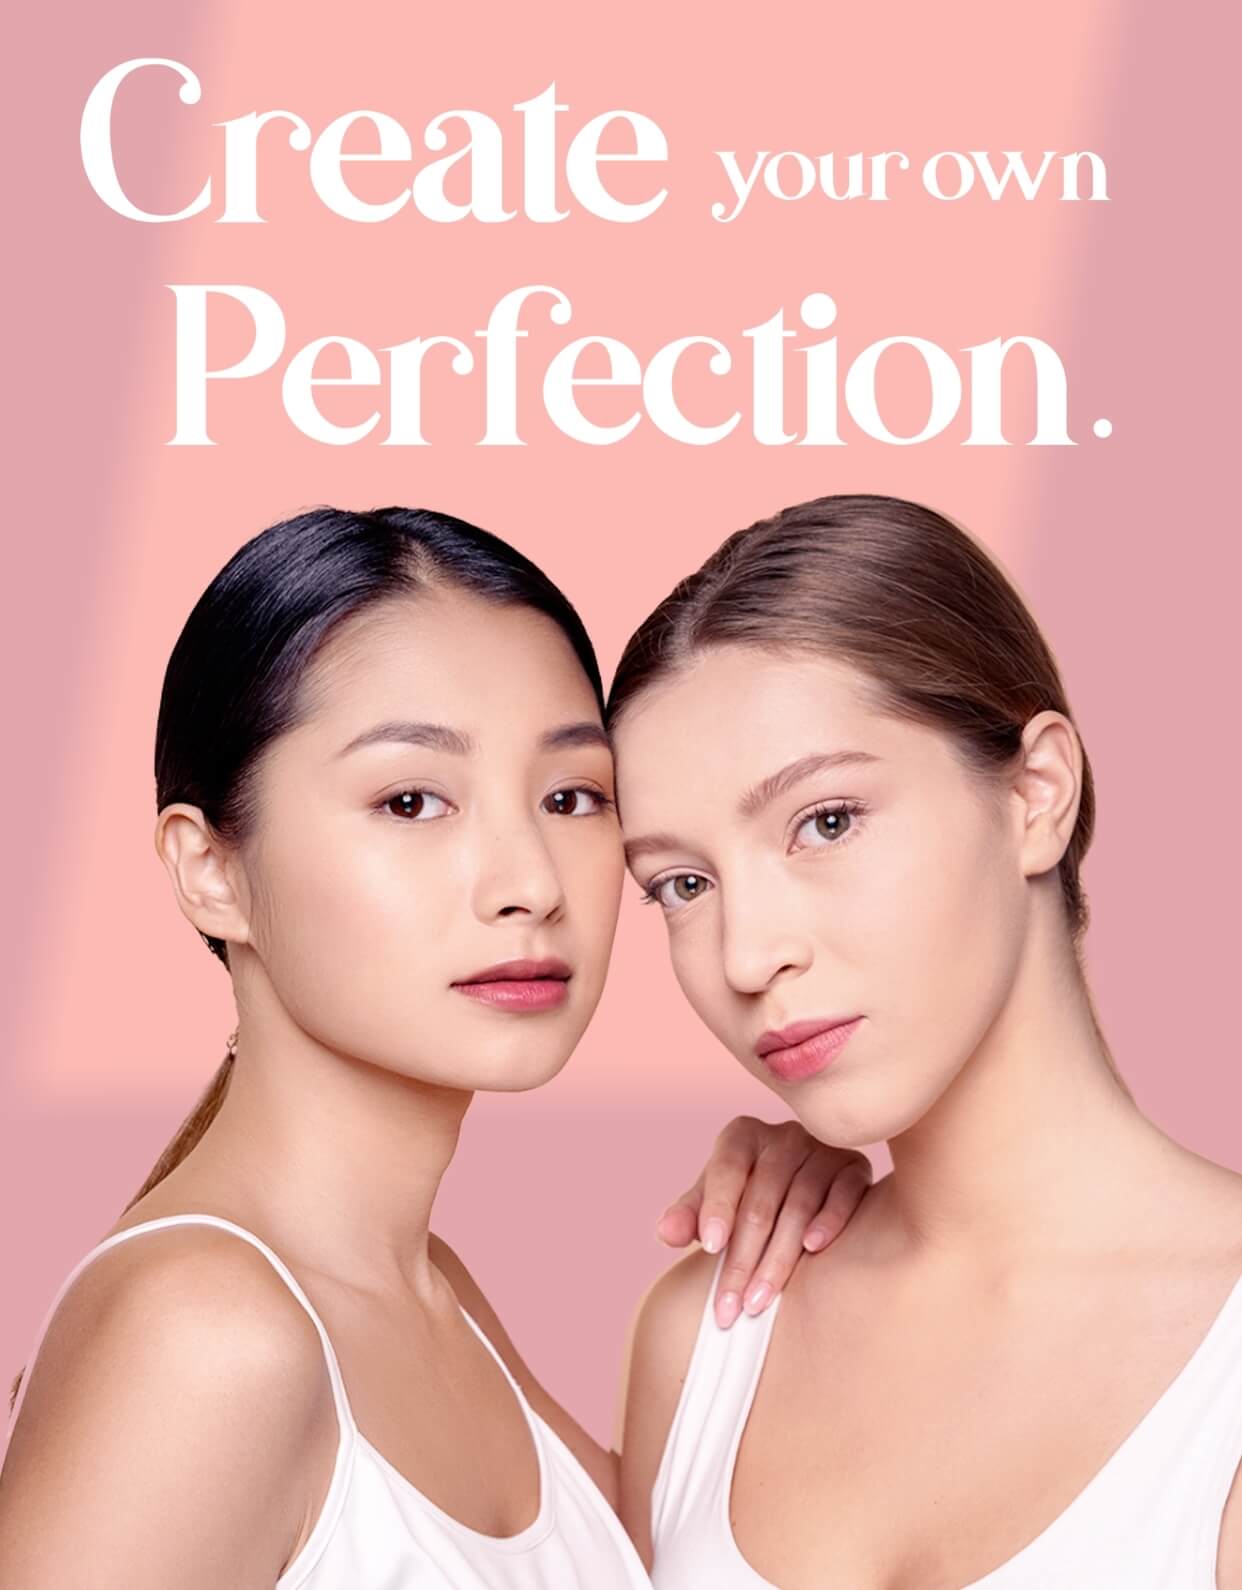 Create your own Perfection